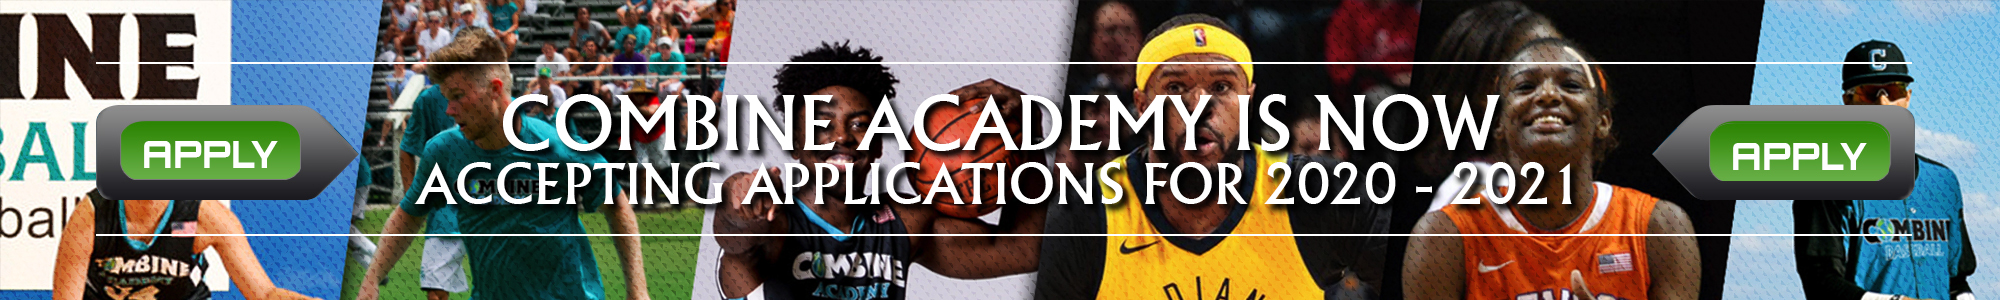 Combine Academy Accepting Applications